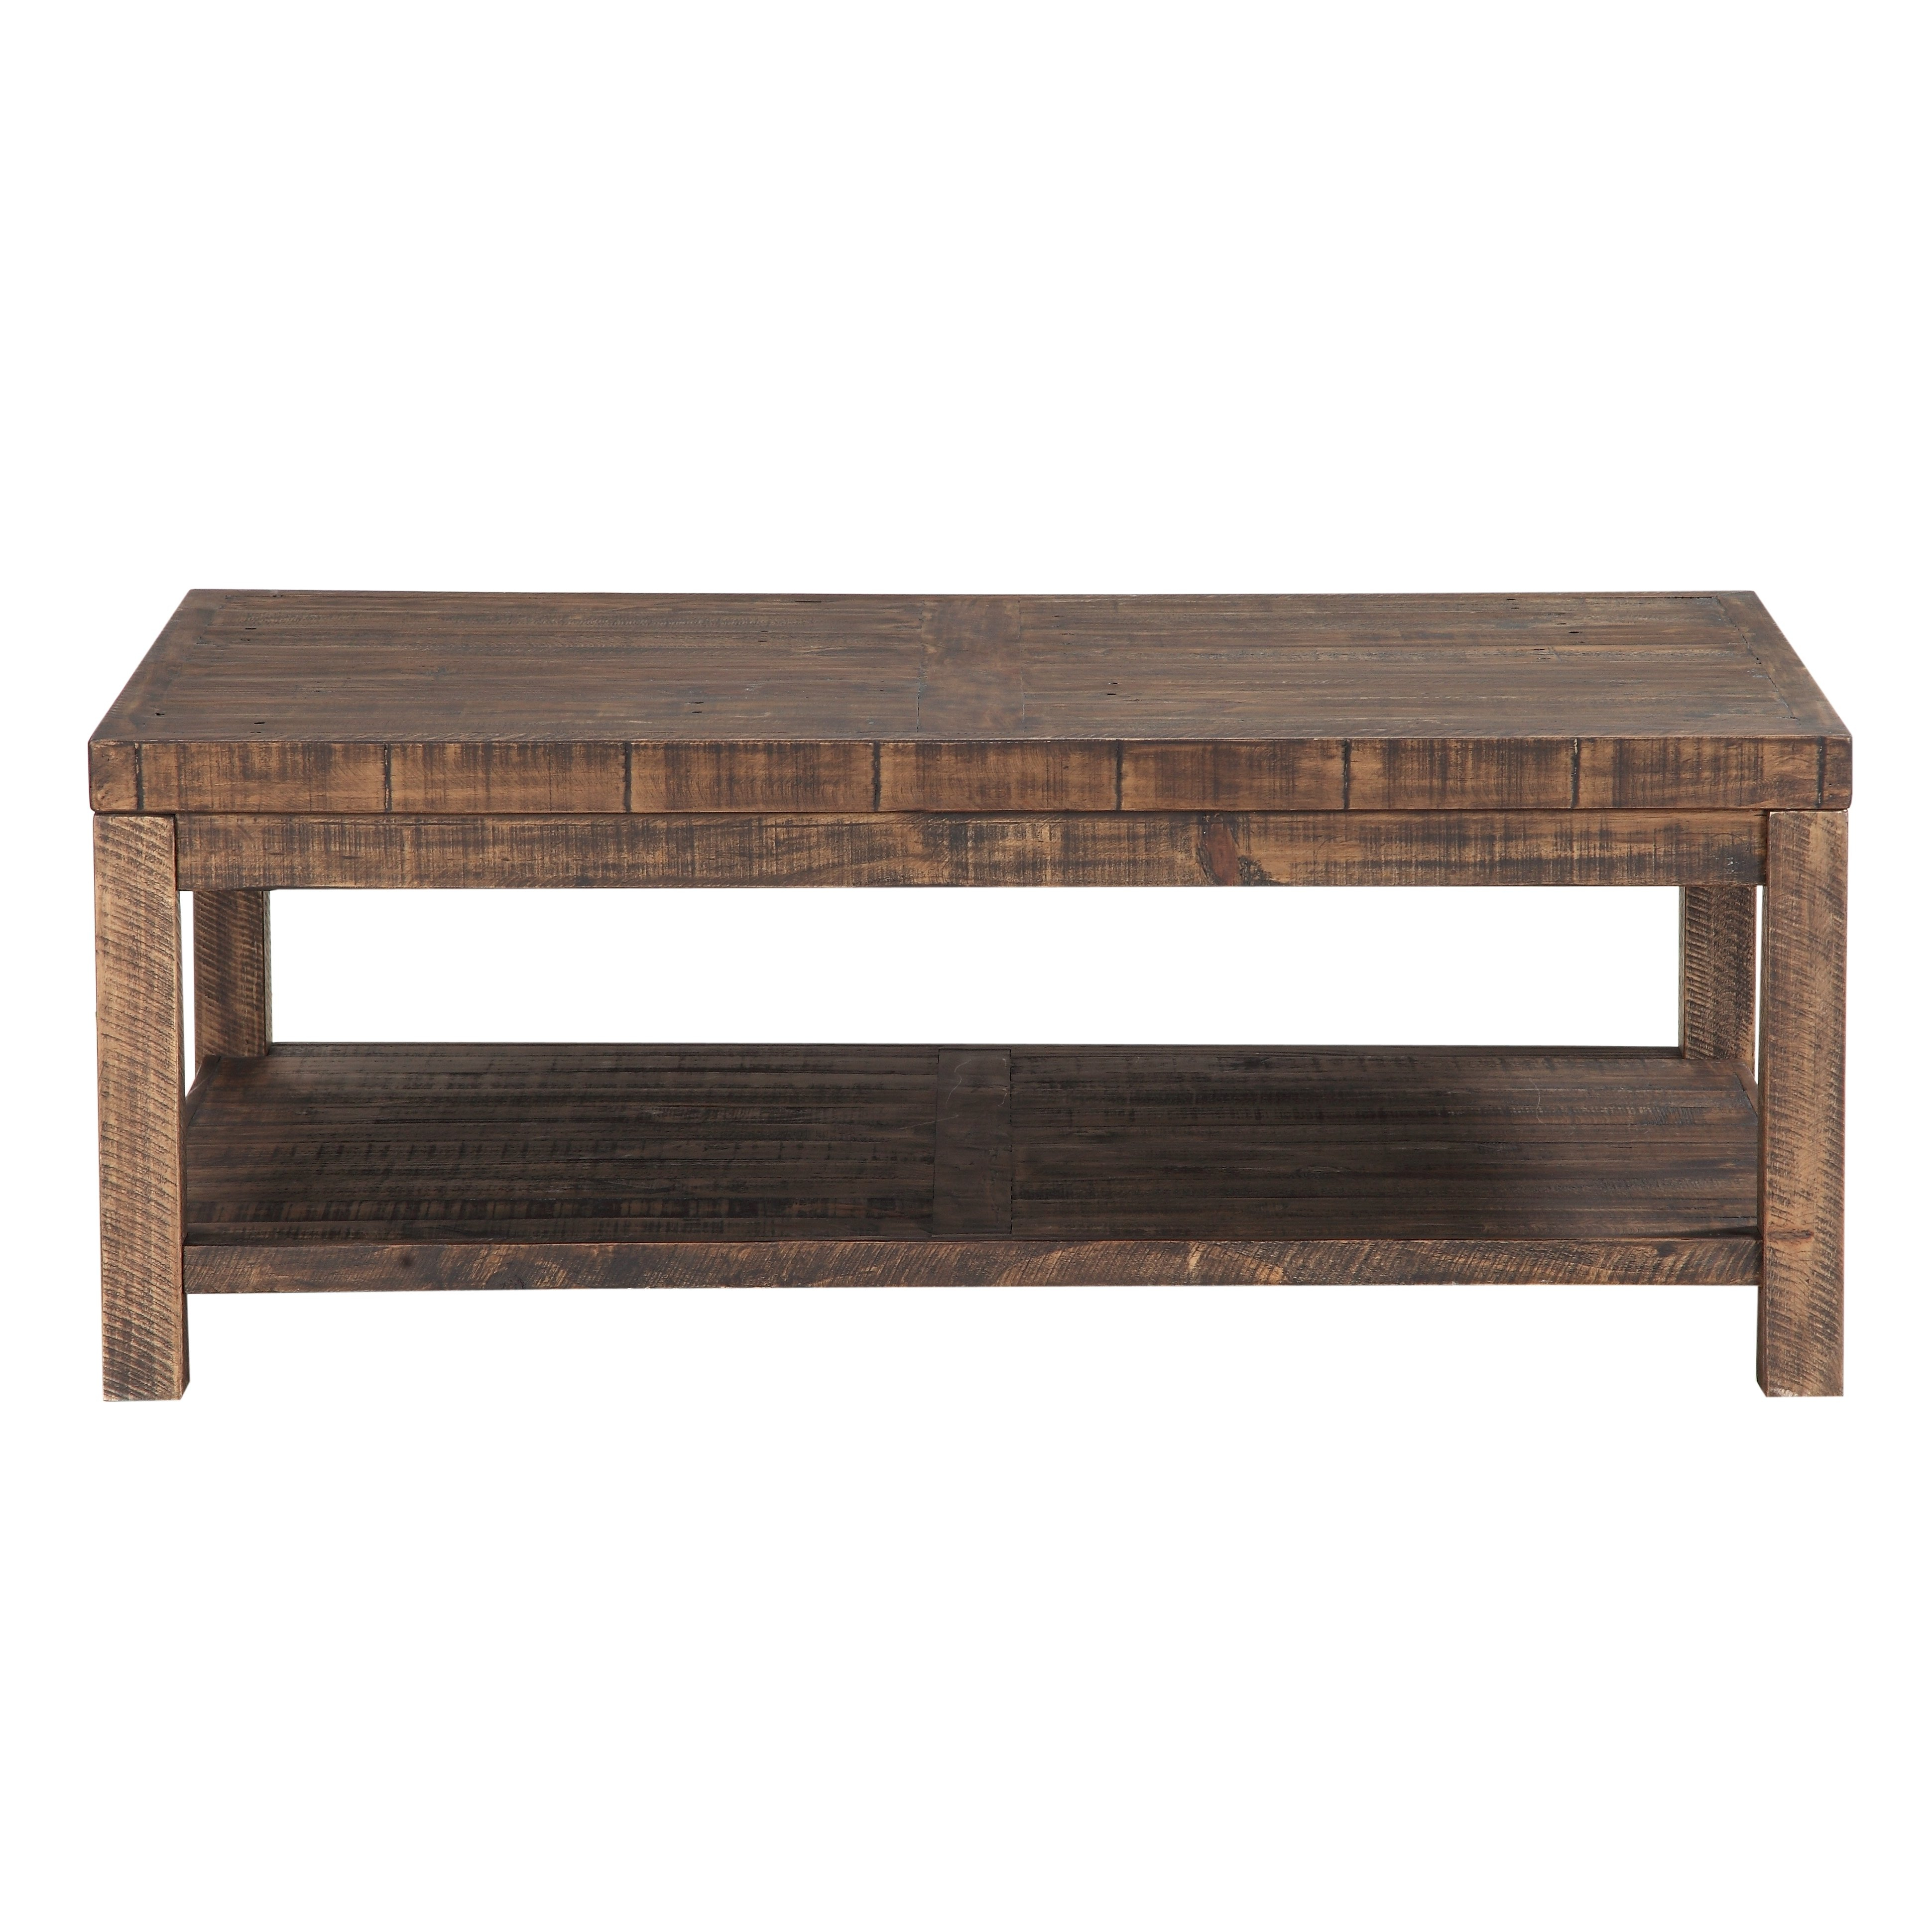 Millwood Pines Stamant Reclaimed Wood Coffee Table Reviews Wayfair pertaining to sizing 3880 X 3880